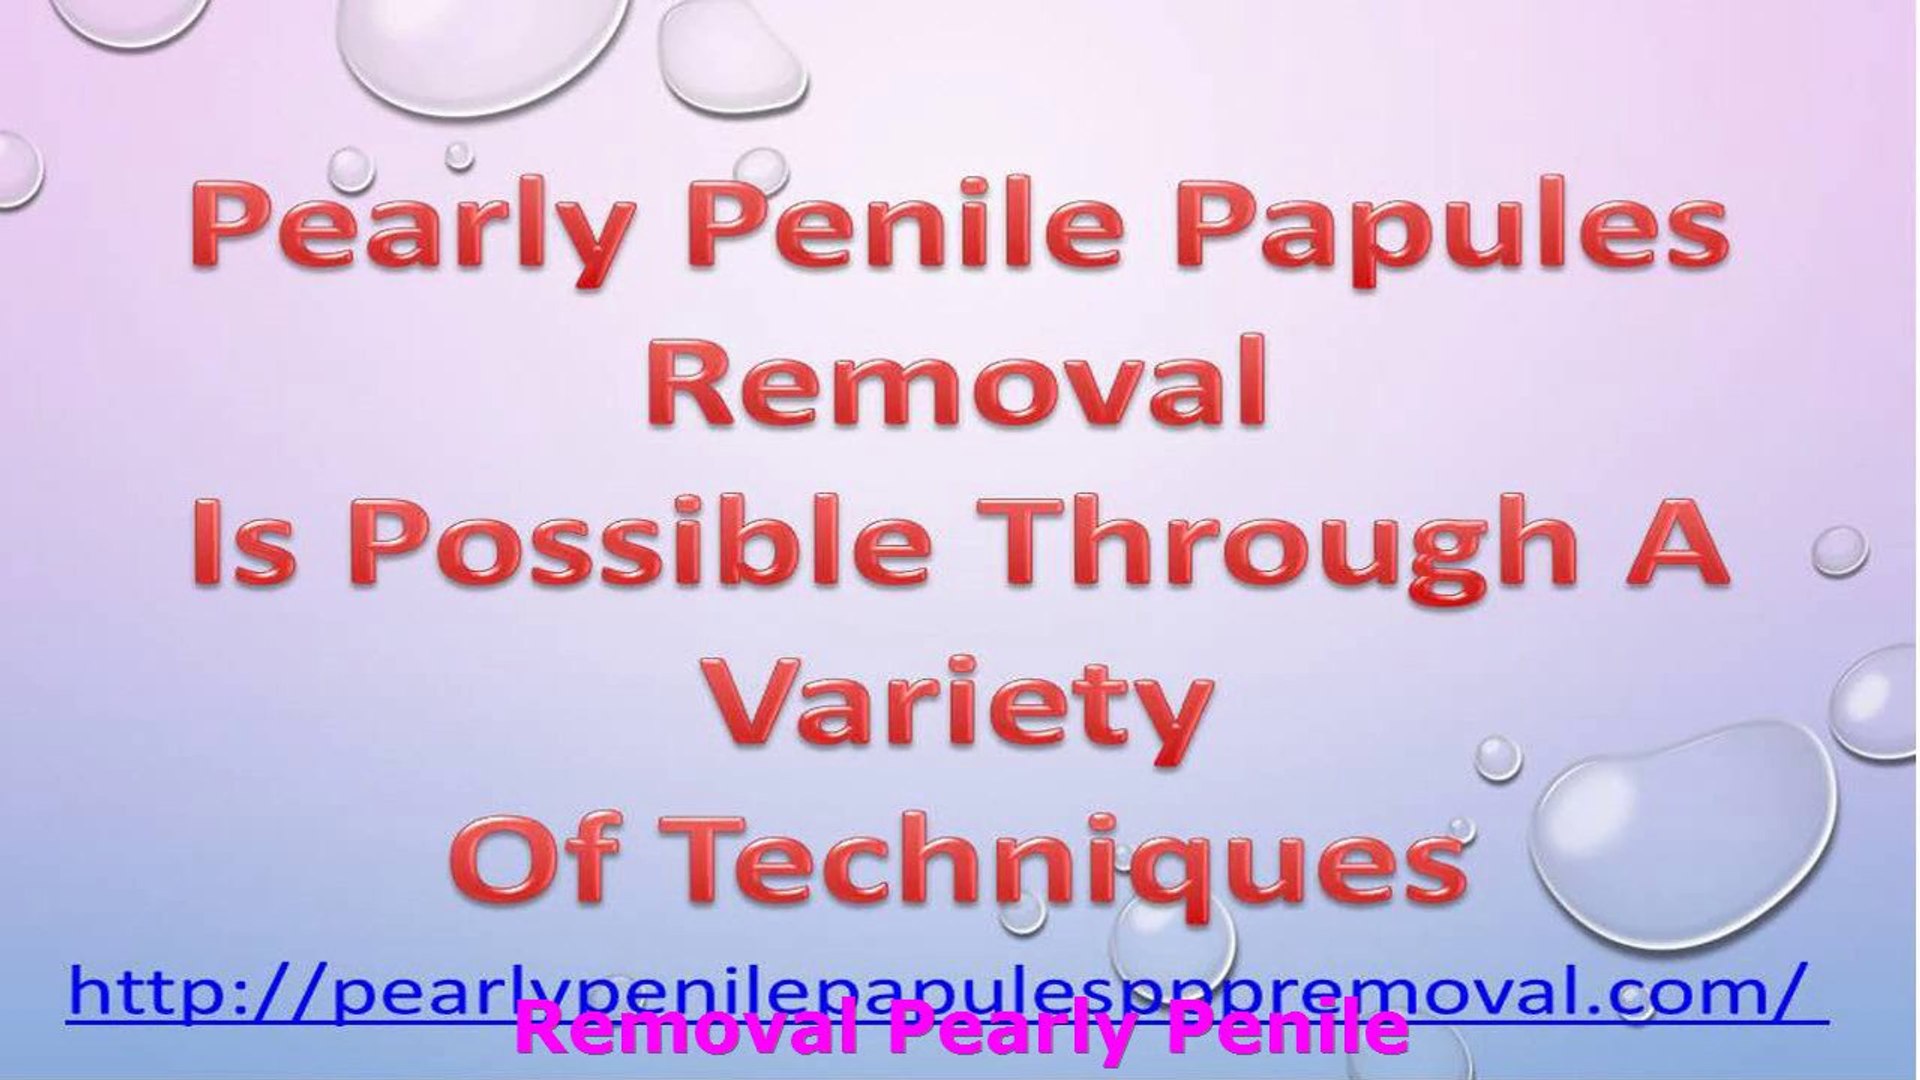 Papules pearly wiki penile PPP Removal